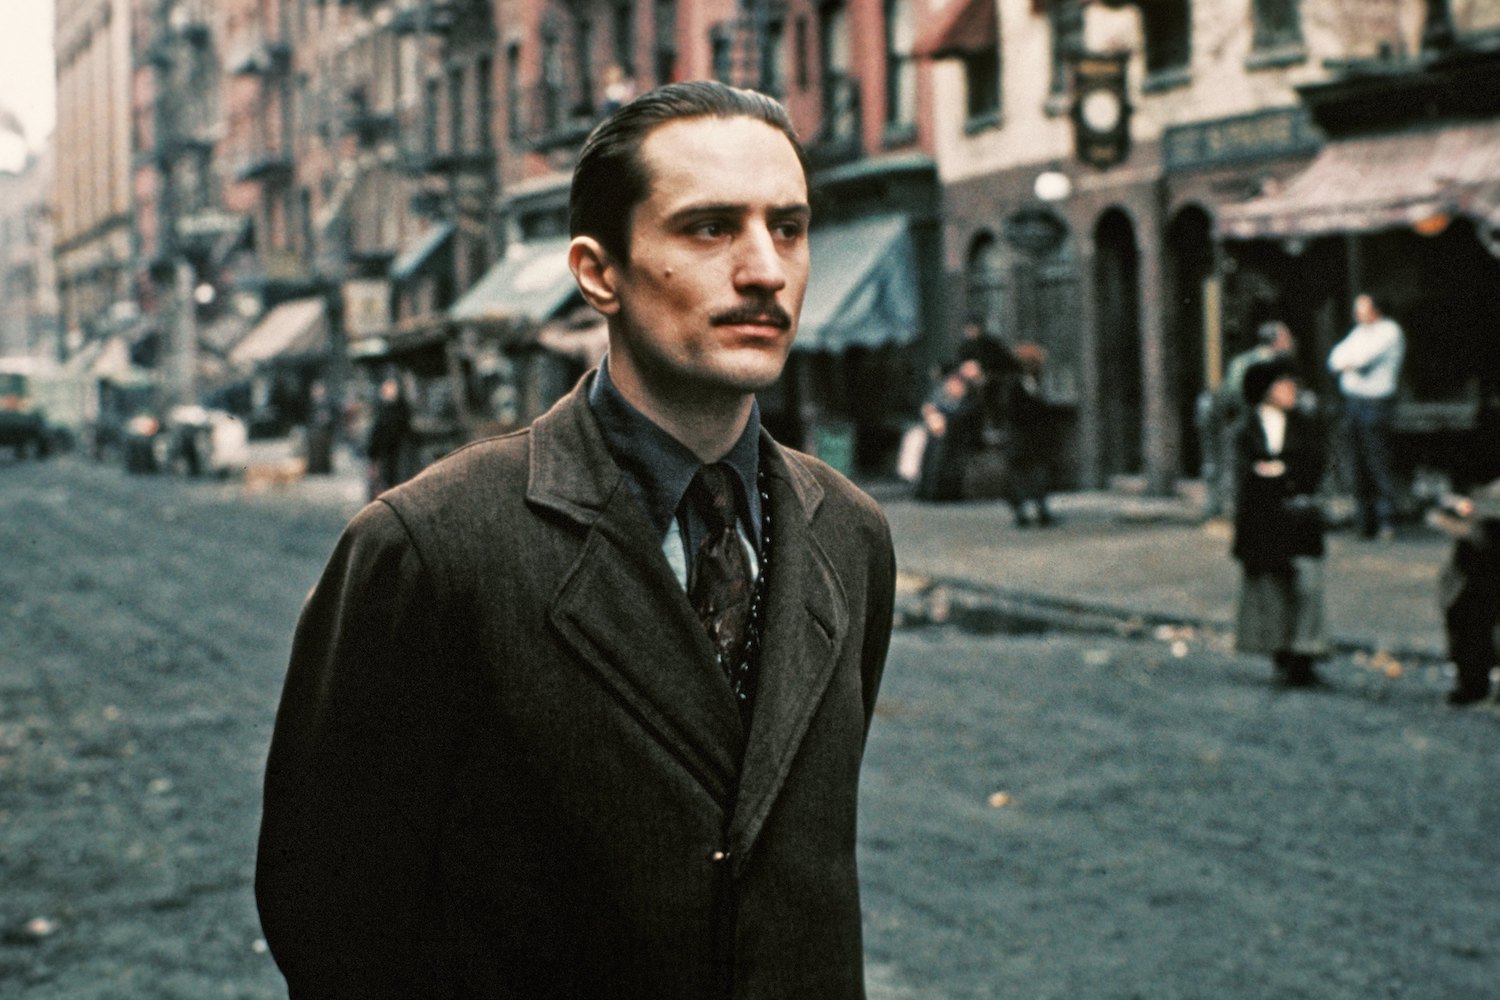 A movie still from The Godfather Part II